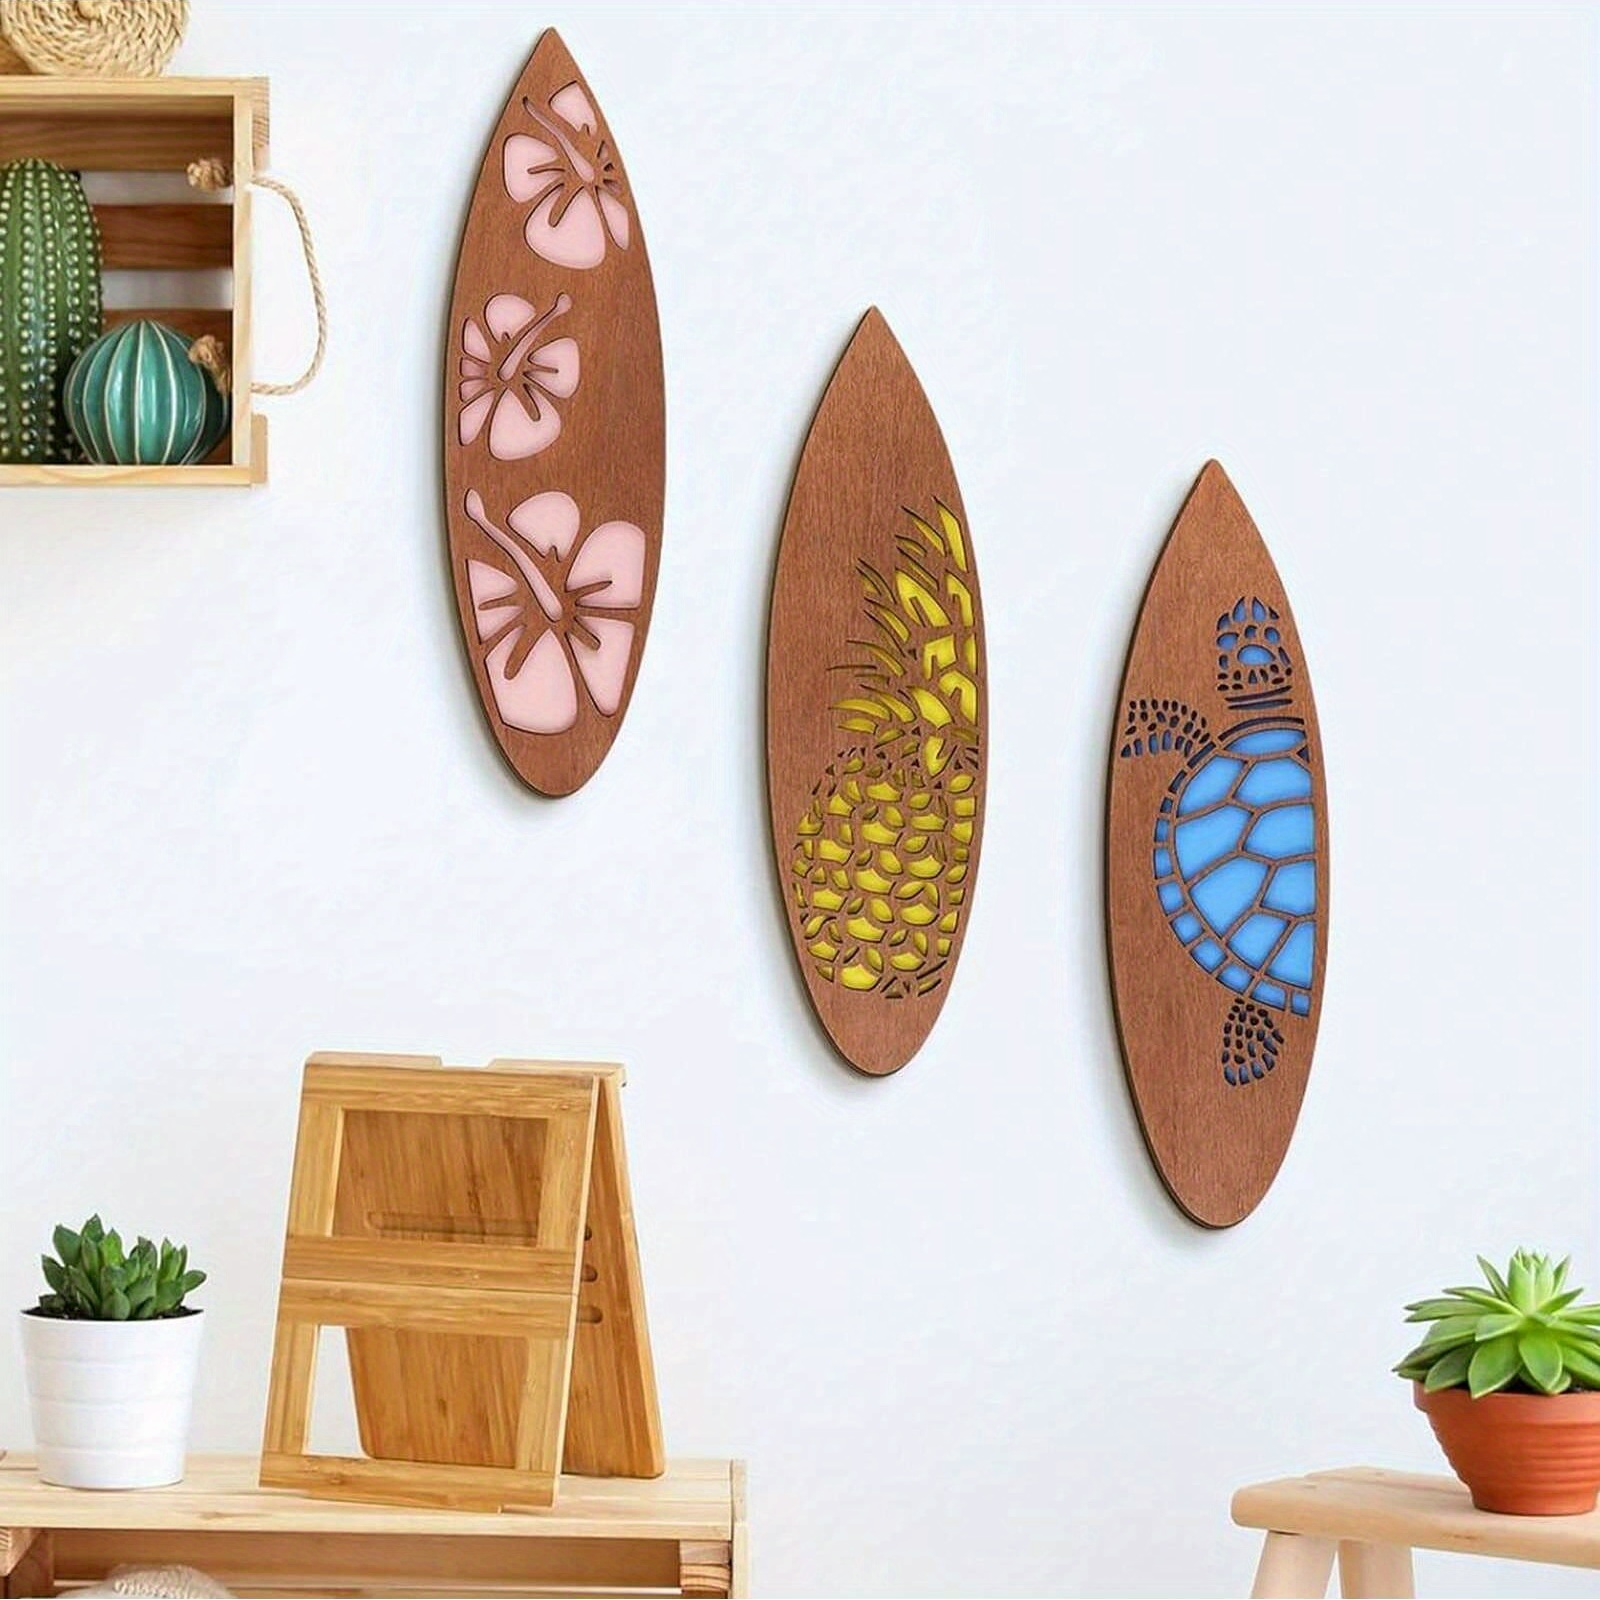 

3 Pcs Wooden Surfboard Wall Art Decor With Hibiscus Flower, Sea Turtle, And Pineapple Cutouts - Art Deco Style Beach Themed Hanging Sculptures For Home Bar And Tropical Decor